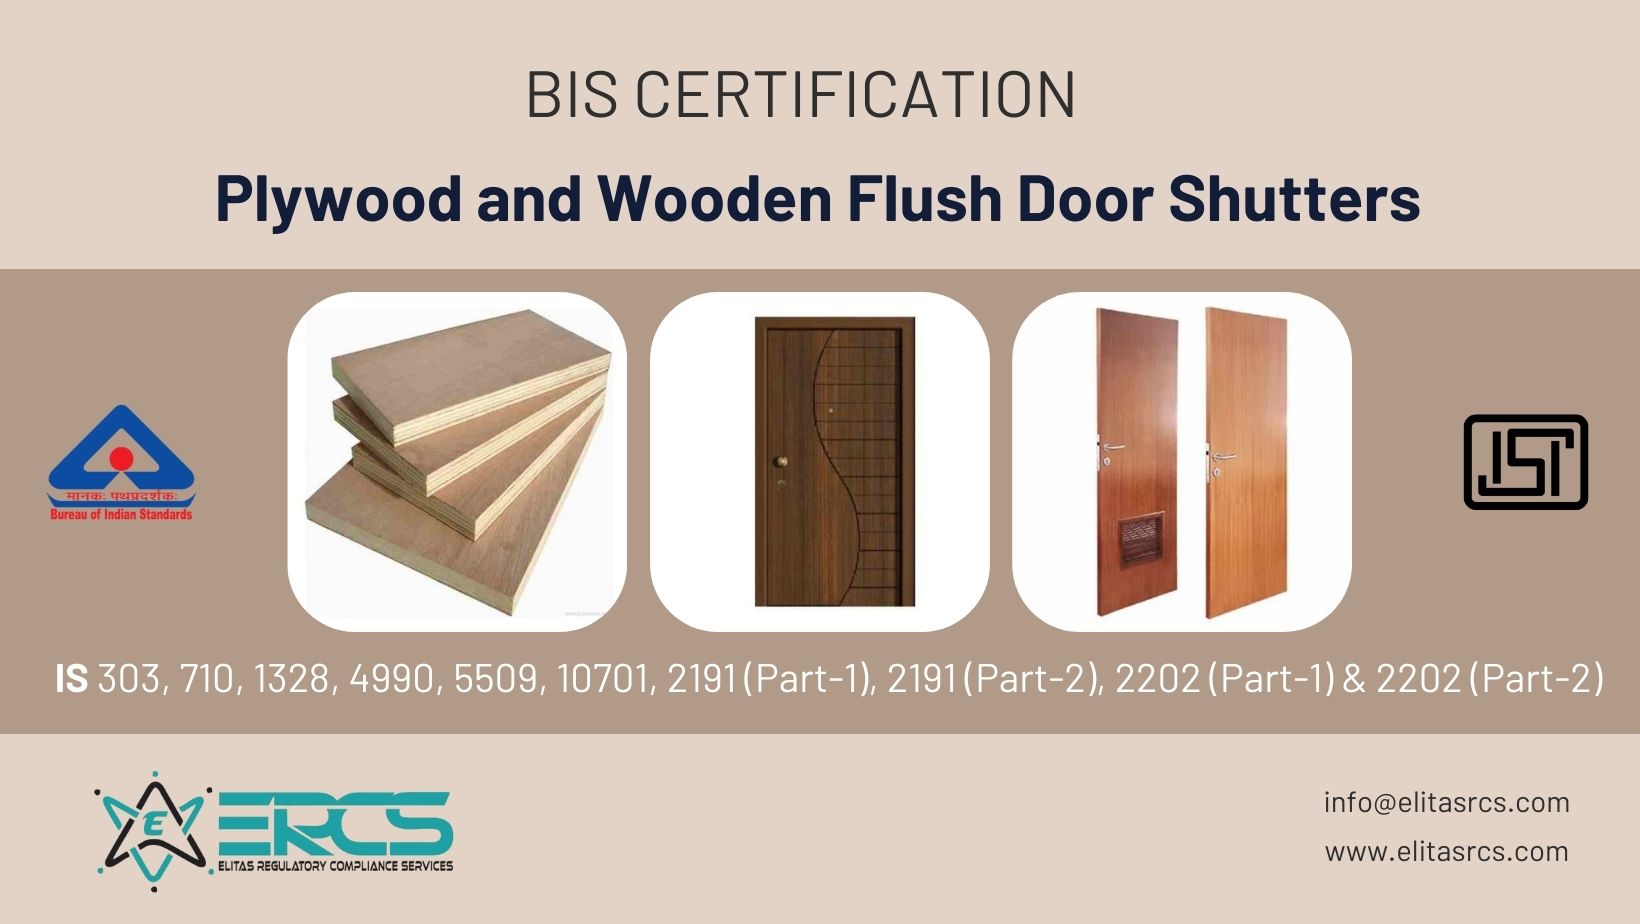 BIS Certification for Plywood and Wooden Flush Door Shutters